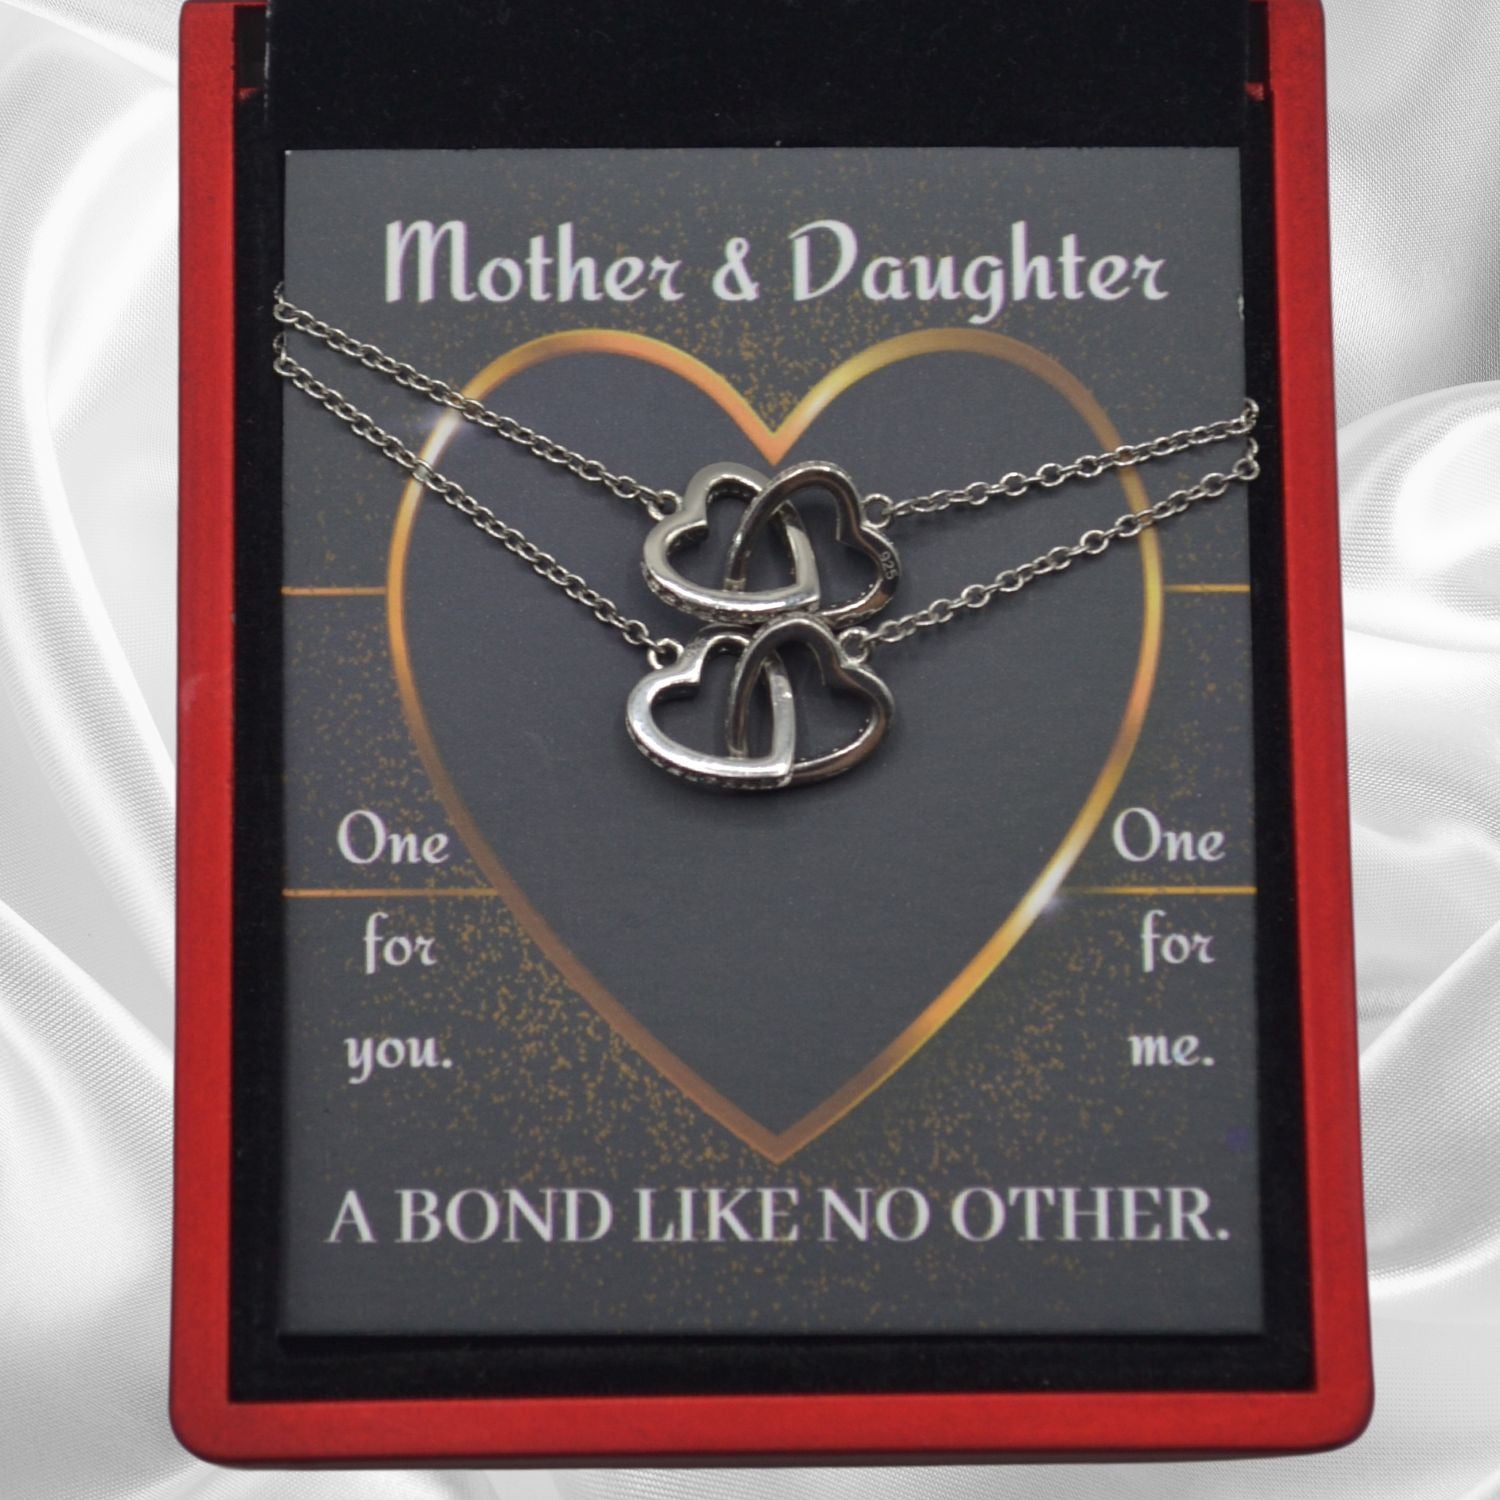 Mother & Daughter Necklaces - One For You & One For Me